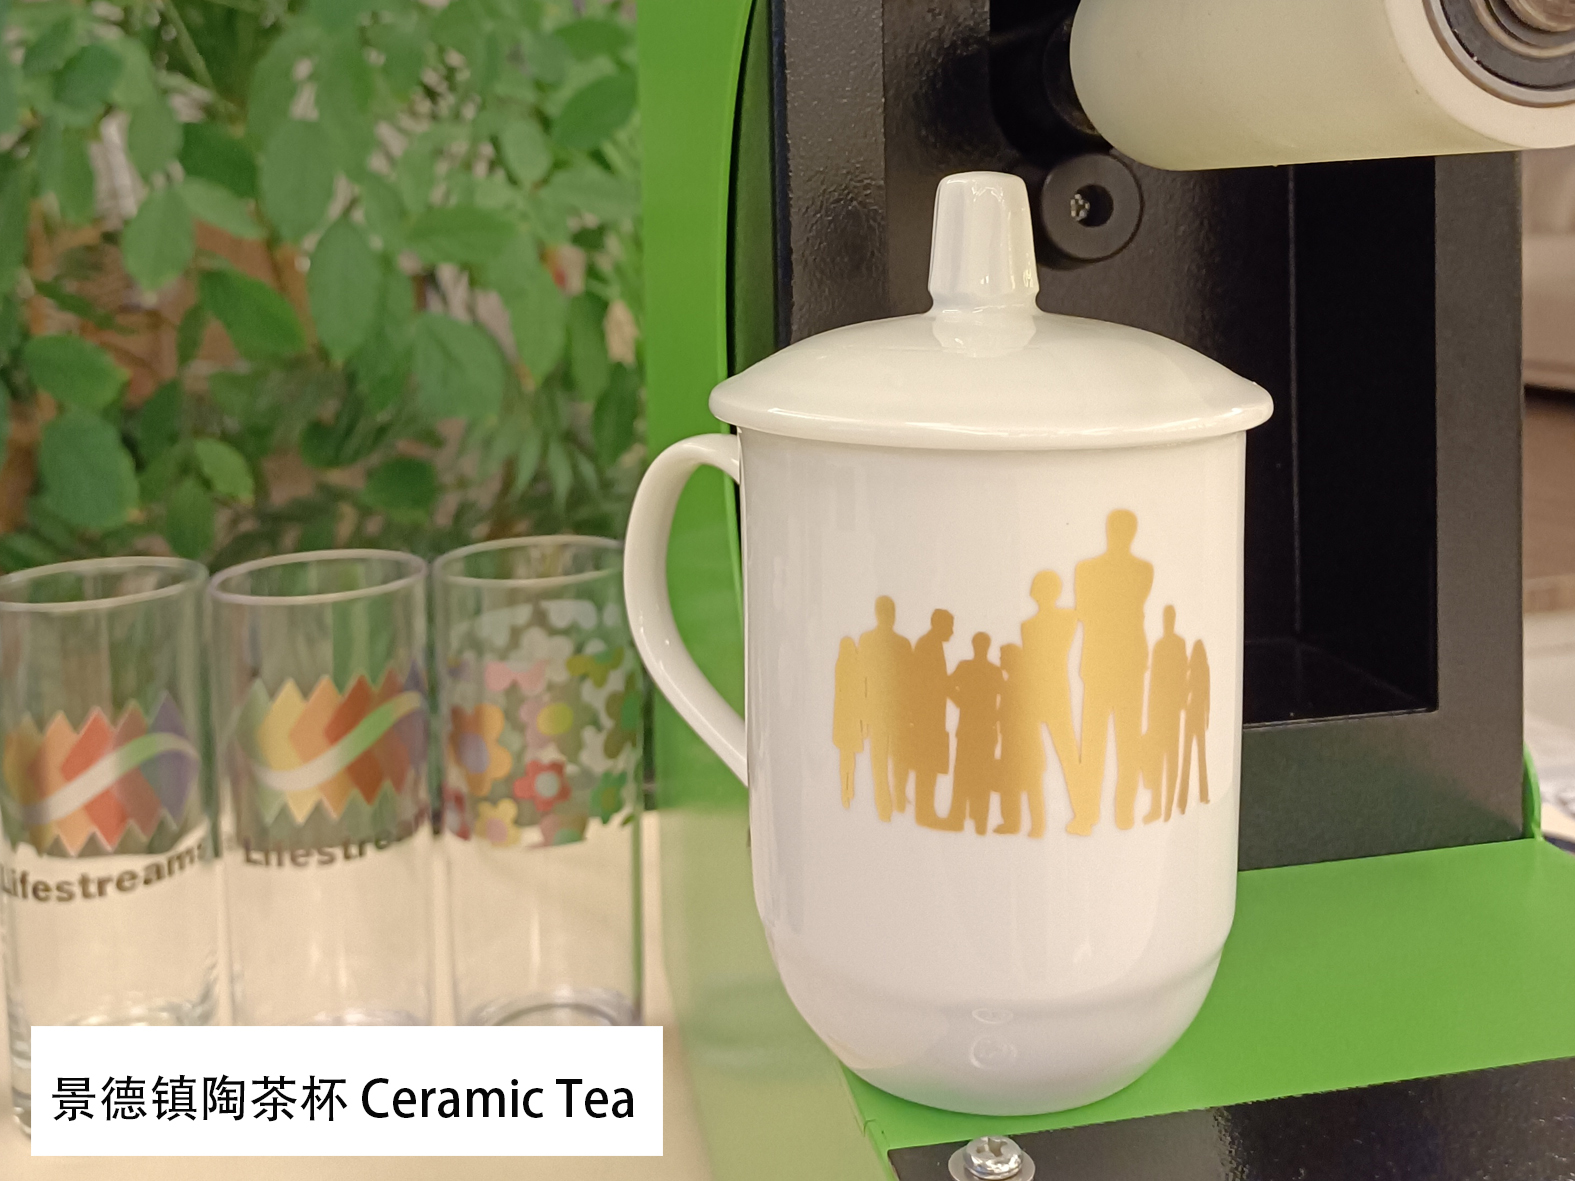 Make Your Exclusive Logos Of Jingdezhen Tea, meeting, office cups With Heat Tansfer Decals Foil